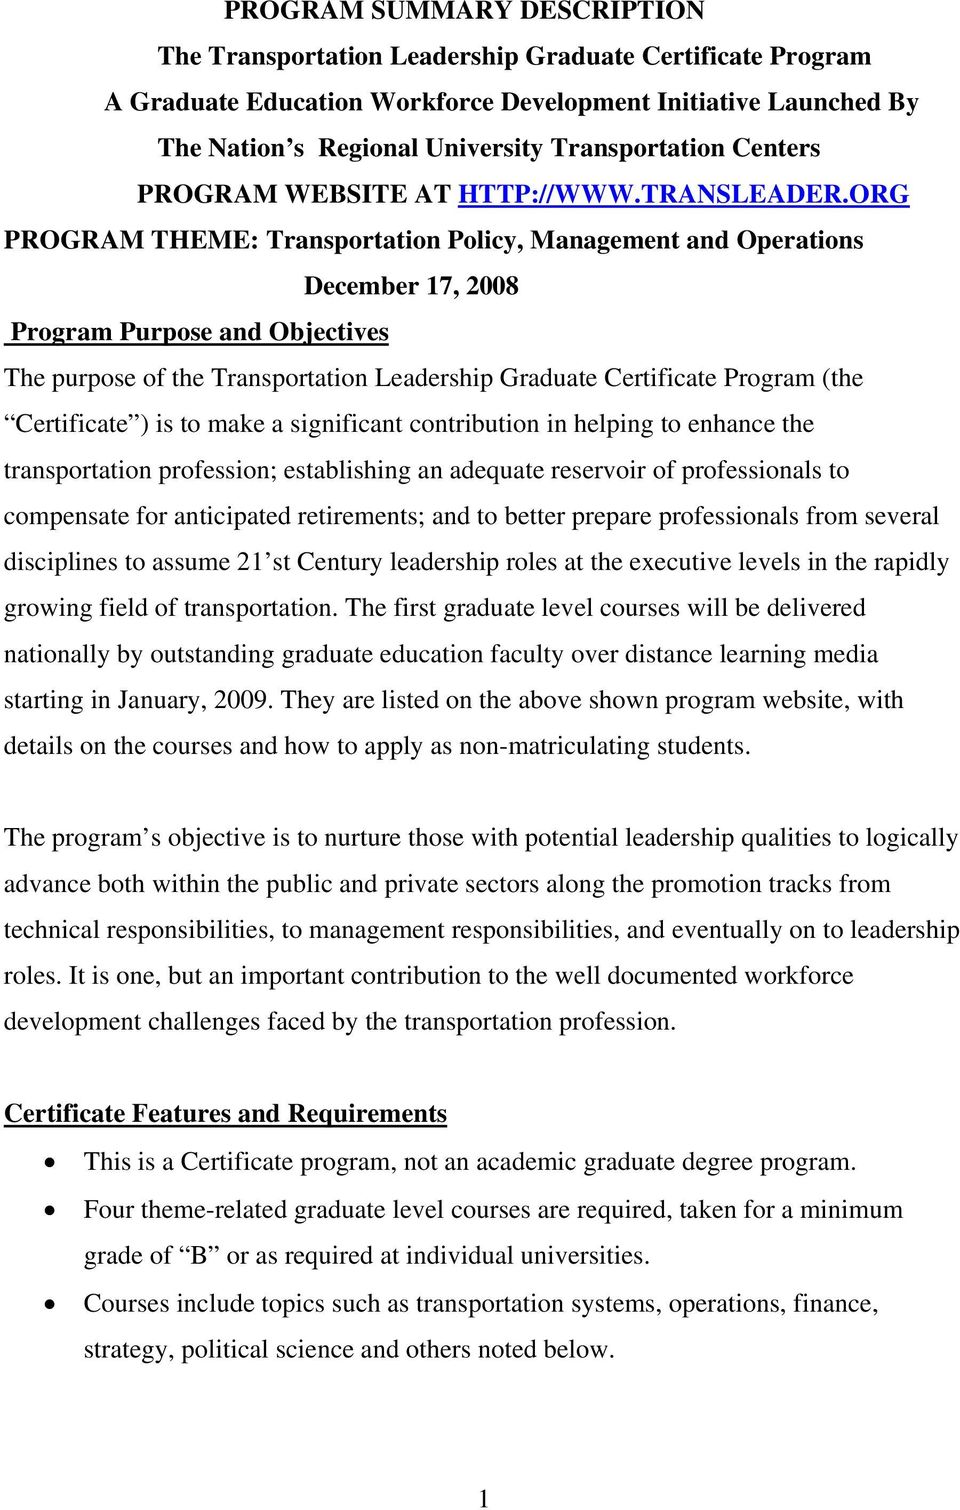 ORG PROGRAM THEME: Transportation Policy, Management and Operations December 17, 2008 Program Purpose and Objectives The purpose of the Transportation Leadership Graduate Certificate Program (the